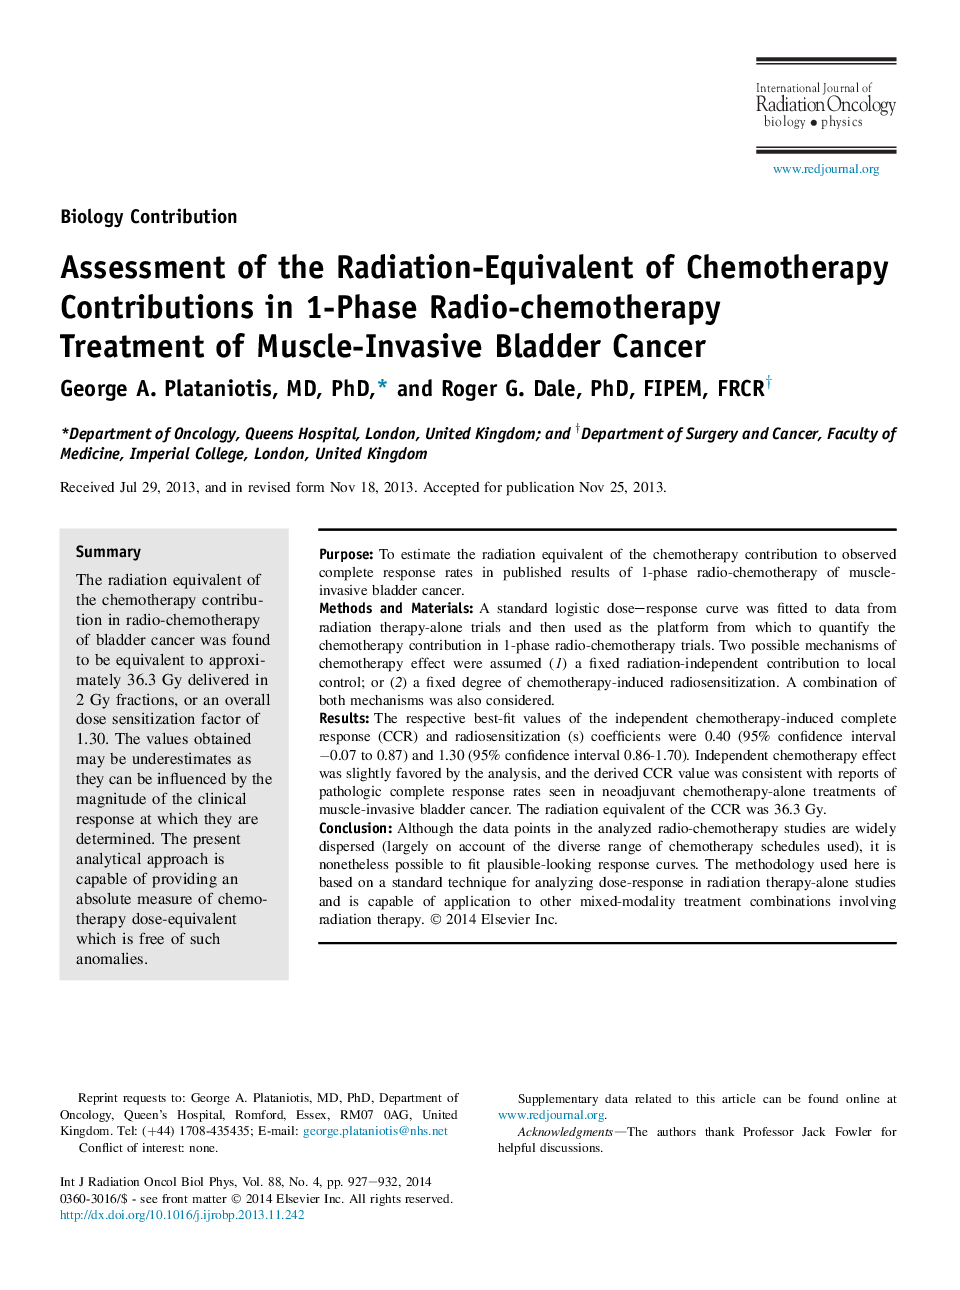 Assessment of the Radiation-Equivalent of Chemotherapy Contributions in 1-Phase Radio-chemotherapy Treatment of Muscle-Invasive Bladder Cancer